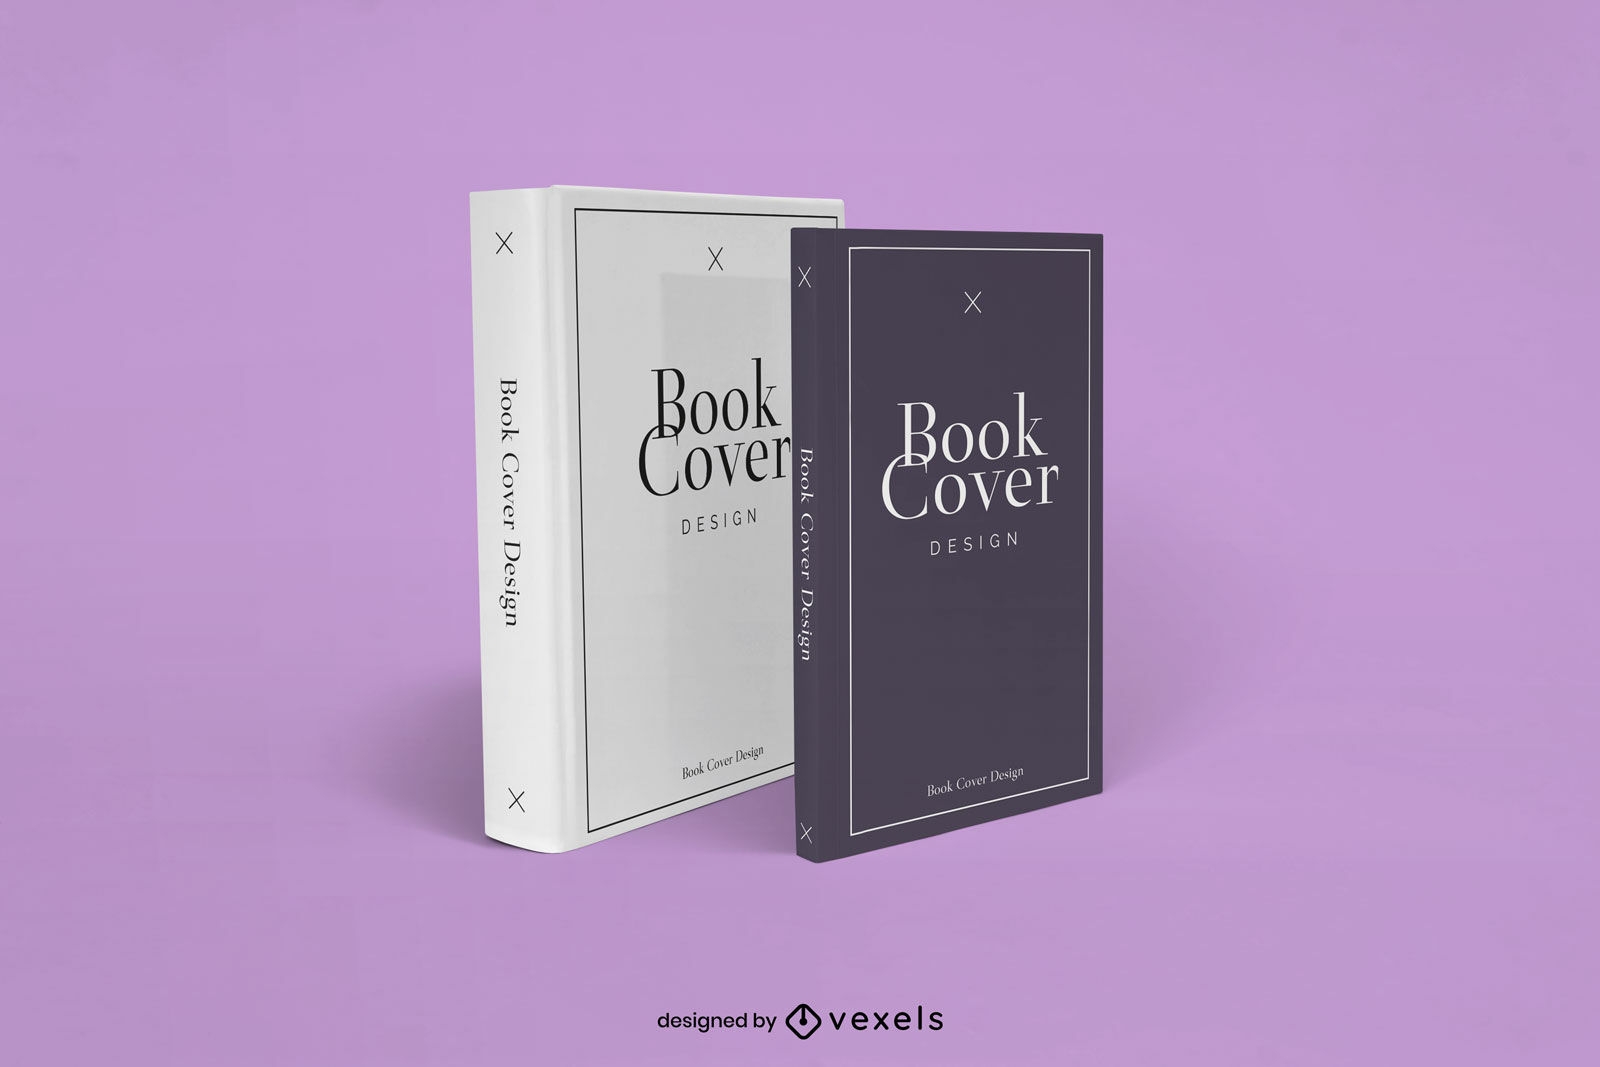 Double books on solid background mockup